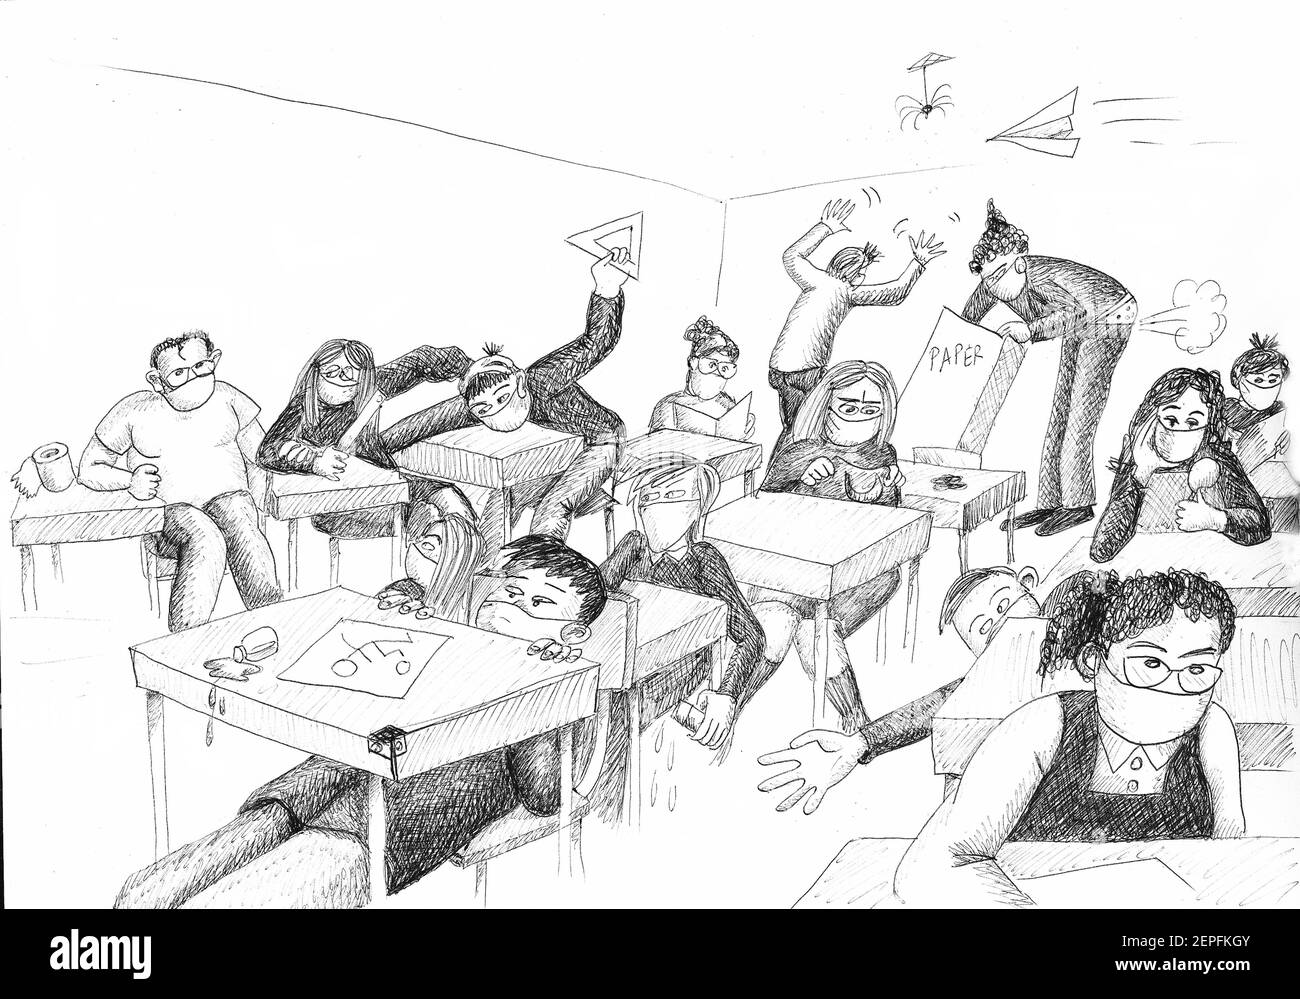 Students behaving badly in class. Illustration. Stock Photo